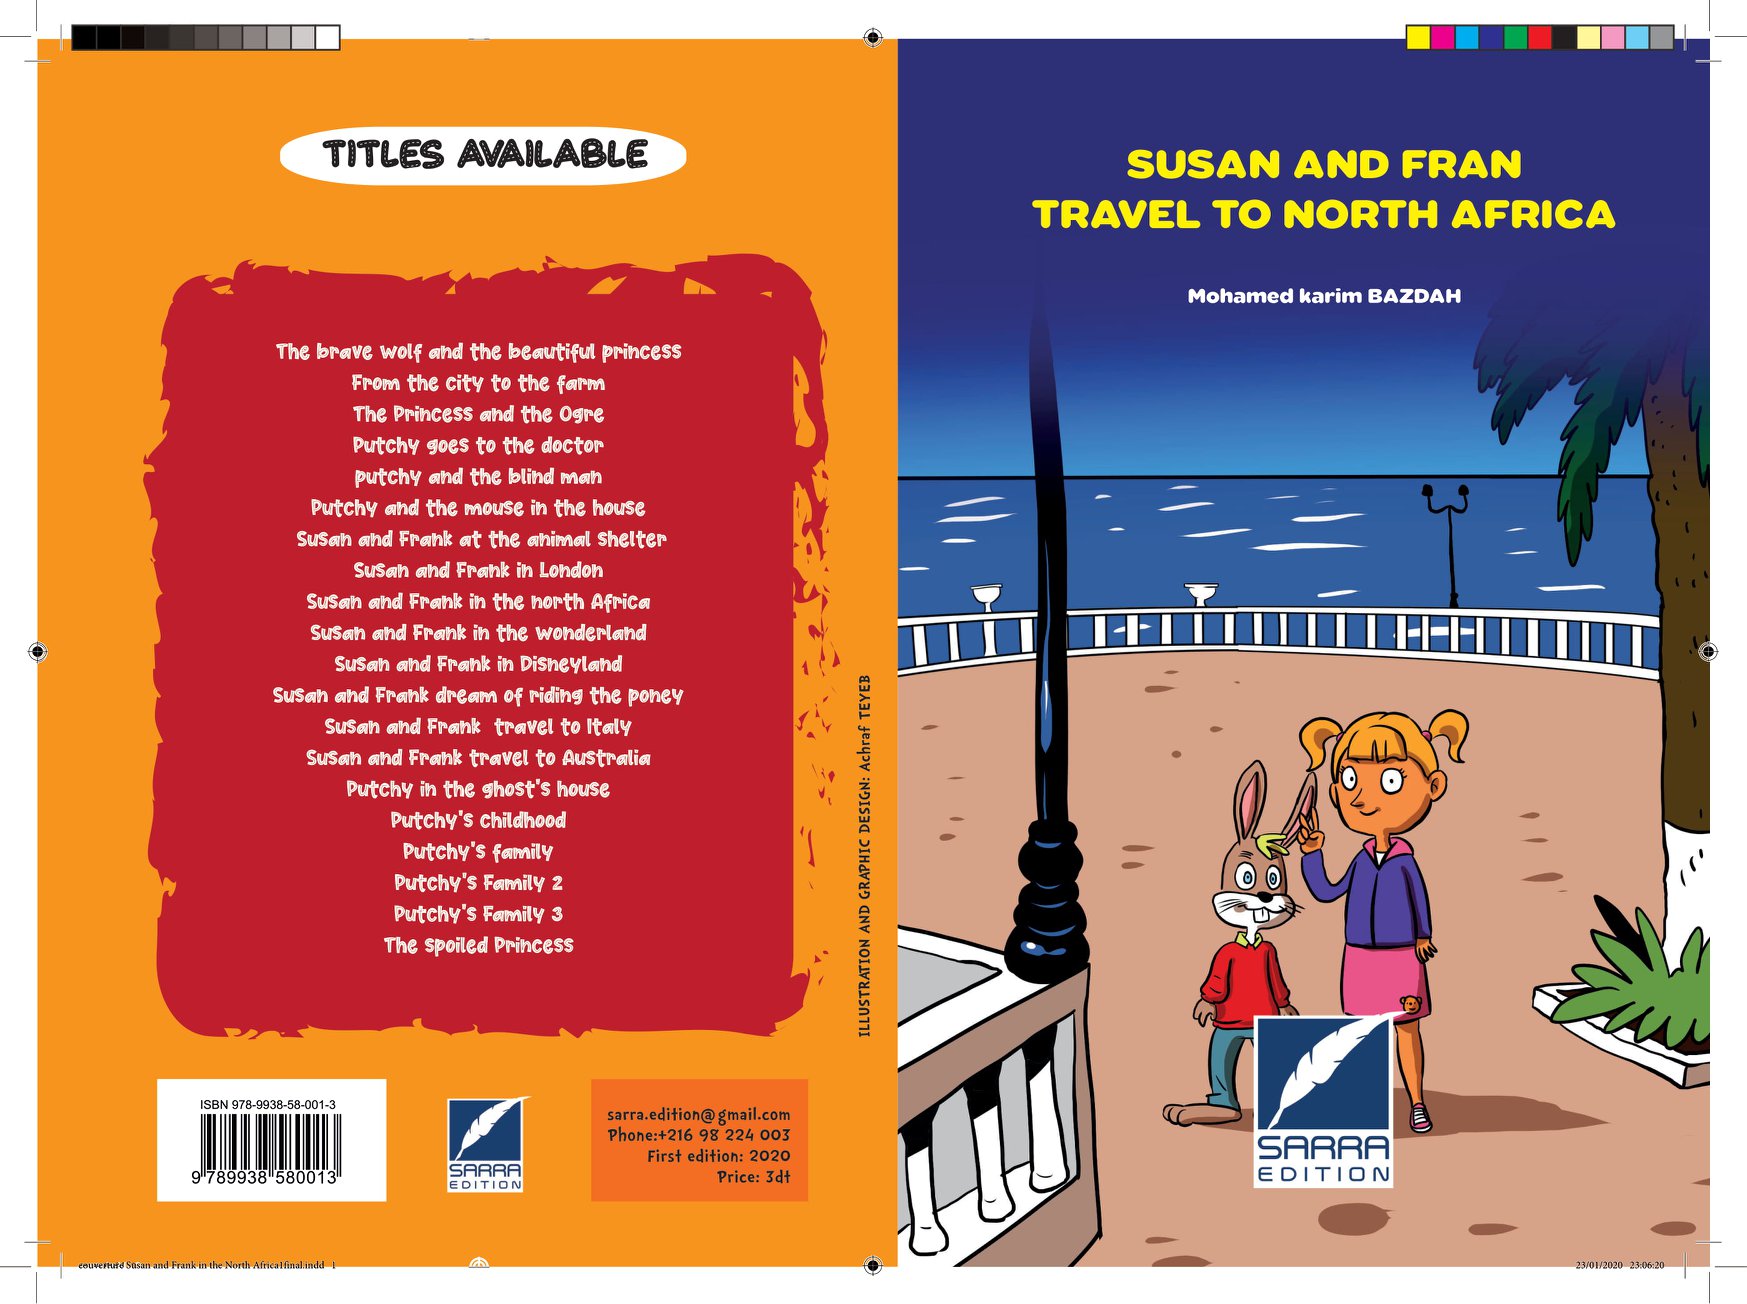 Susan and Frank travel to noth Africa